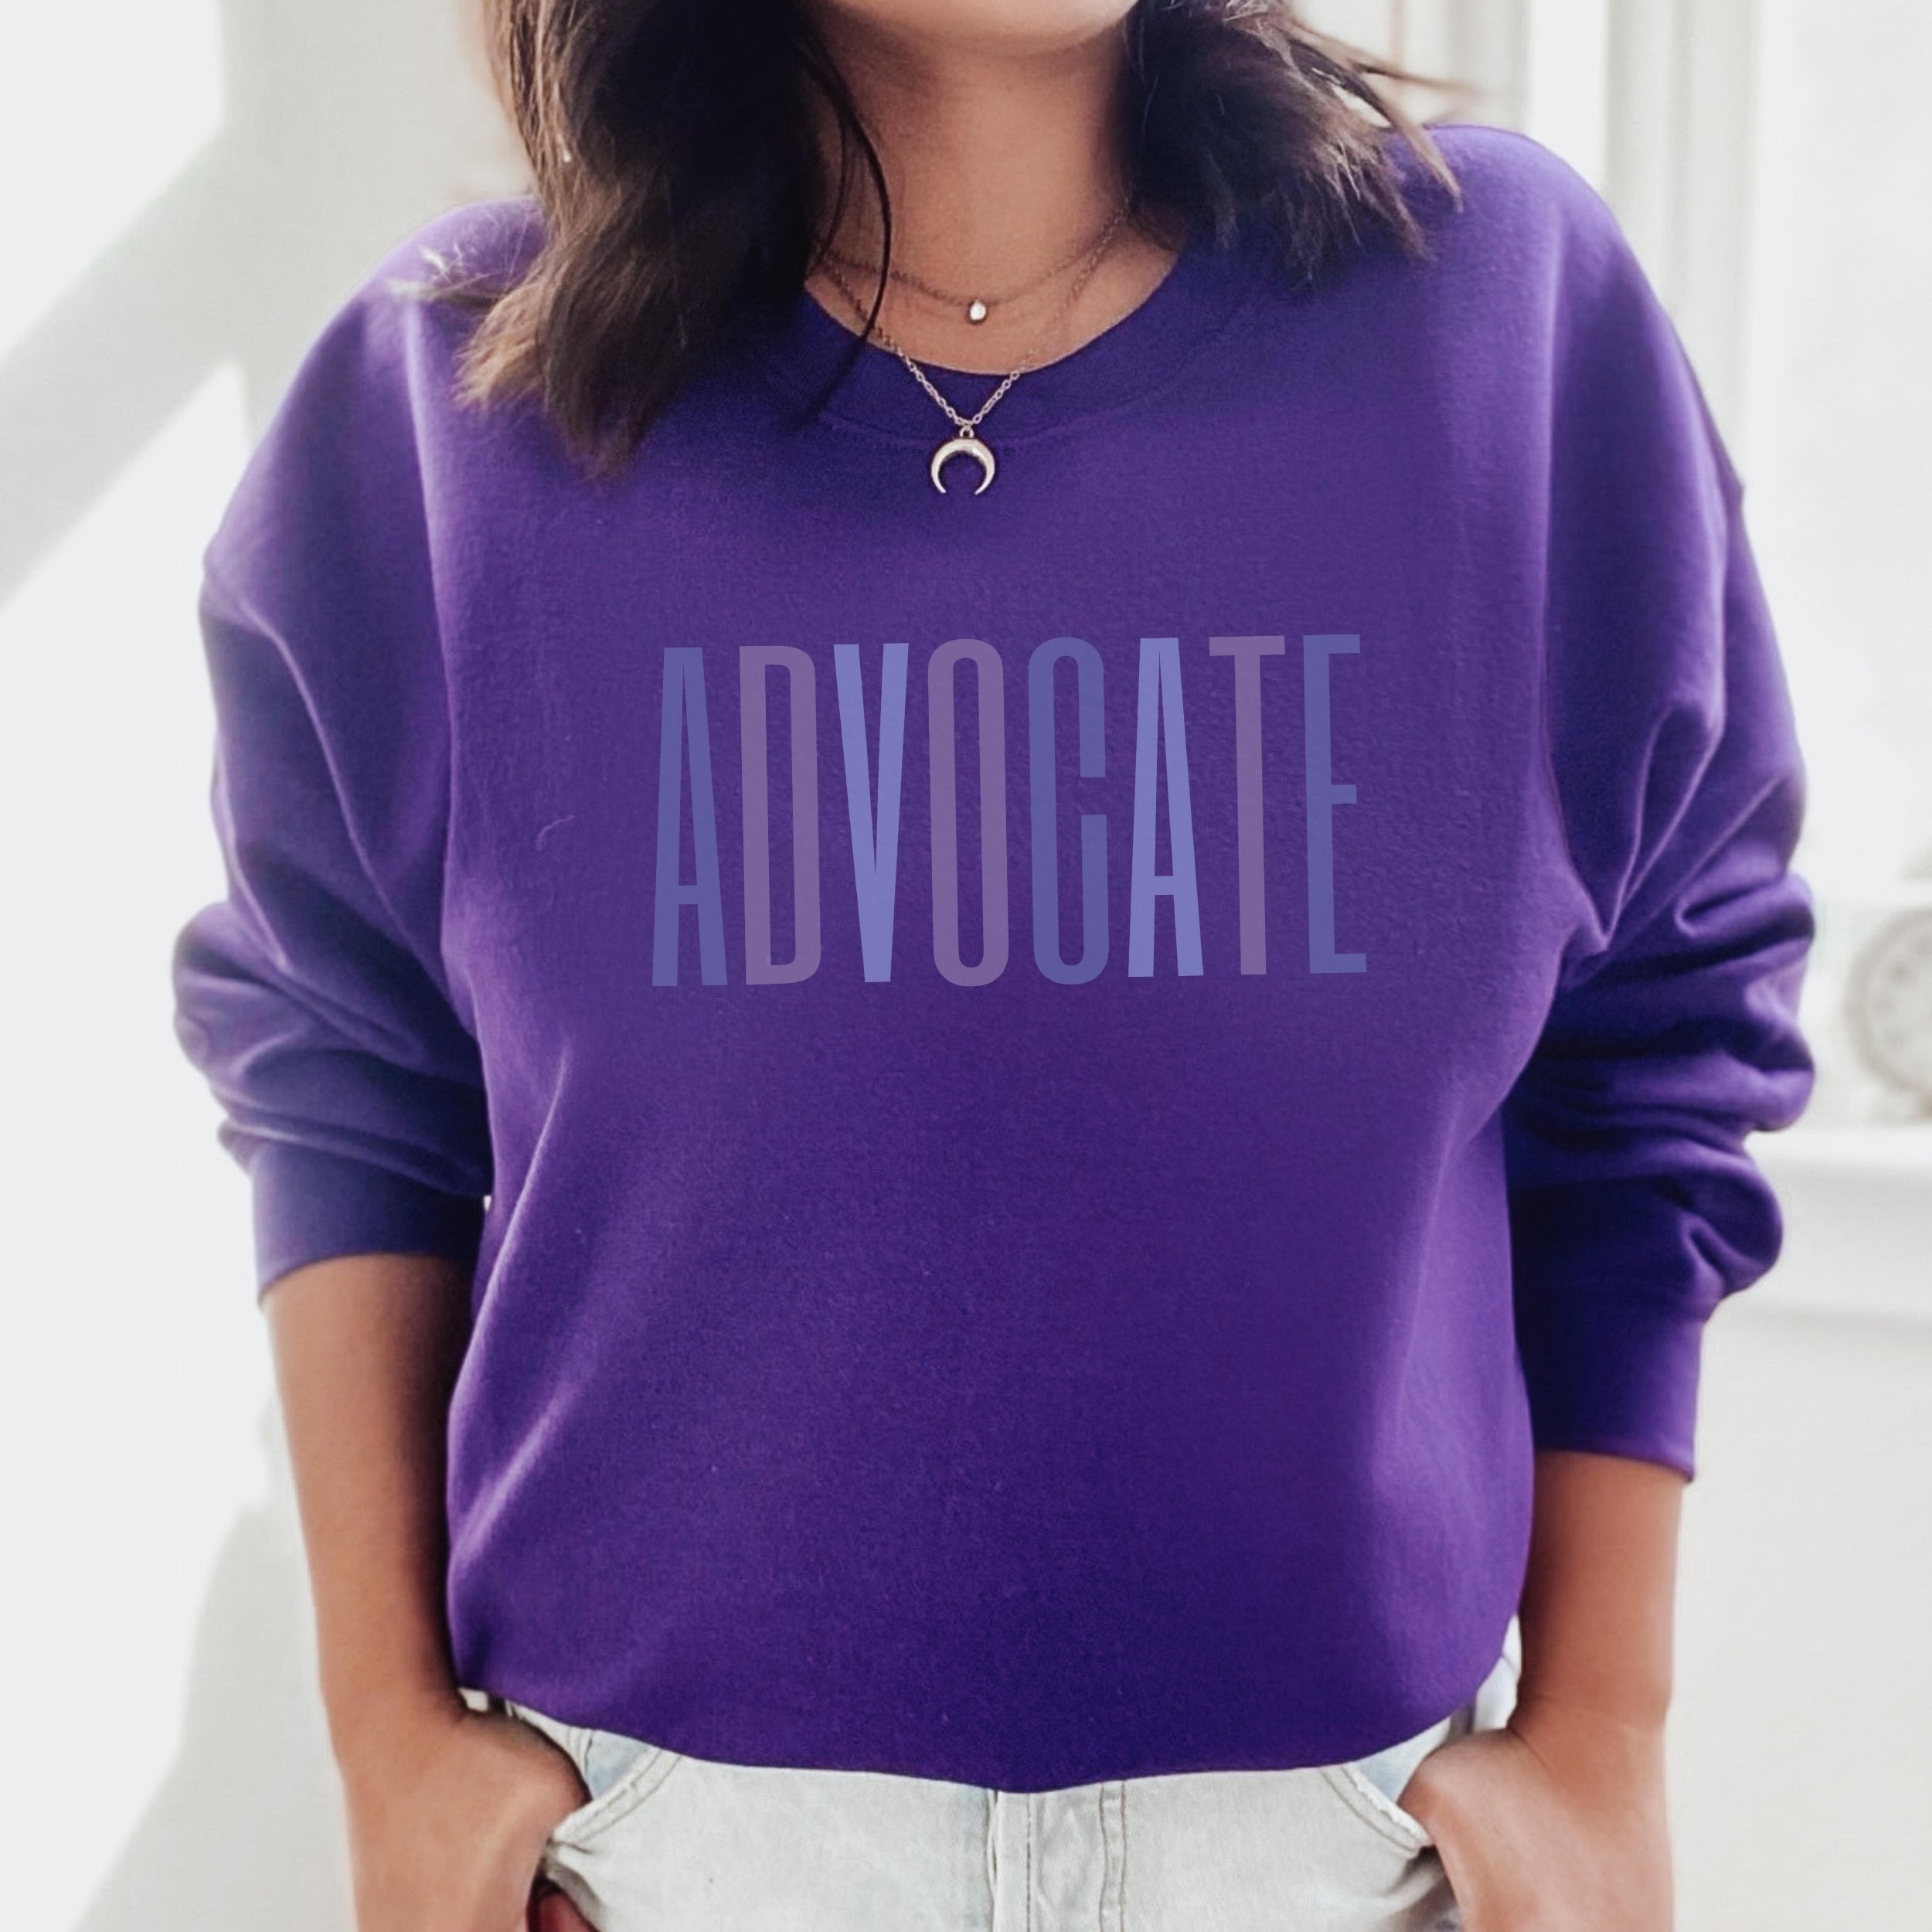 Purple crewneck sweatshirt with a powerful  "ADVOCATE" wordmark emblazoned across the chest in varying shades of purple, symbolizing the strength and unity of domestic violence advocates. The gradient effect from deep violet to lavender adds an eye-catching touch, making this sweater a visually compelling tribute to your commitment to ending domestic abuse.